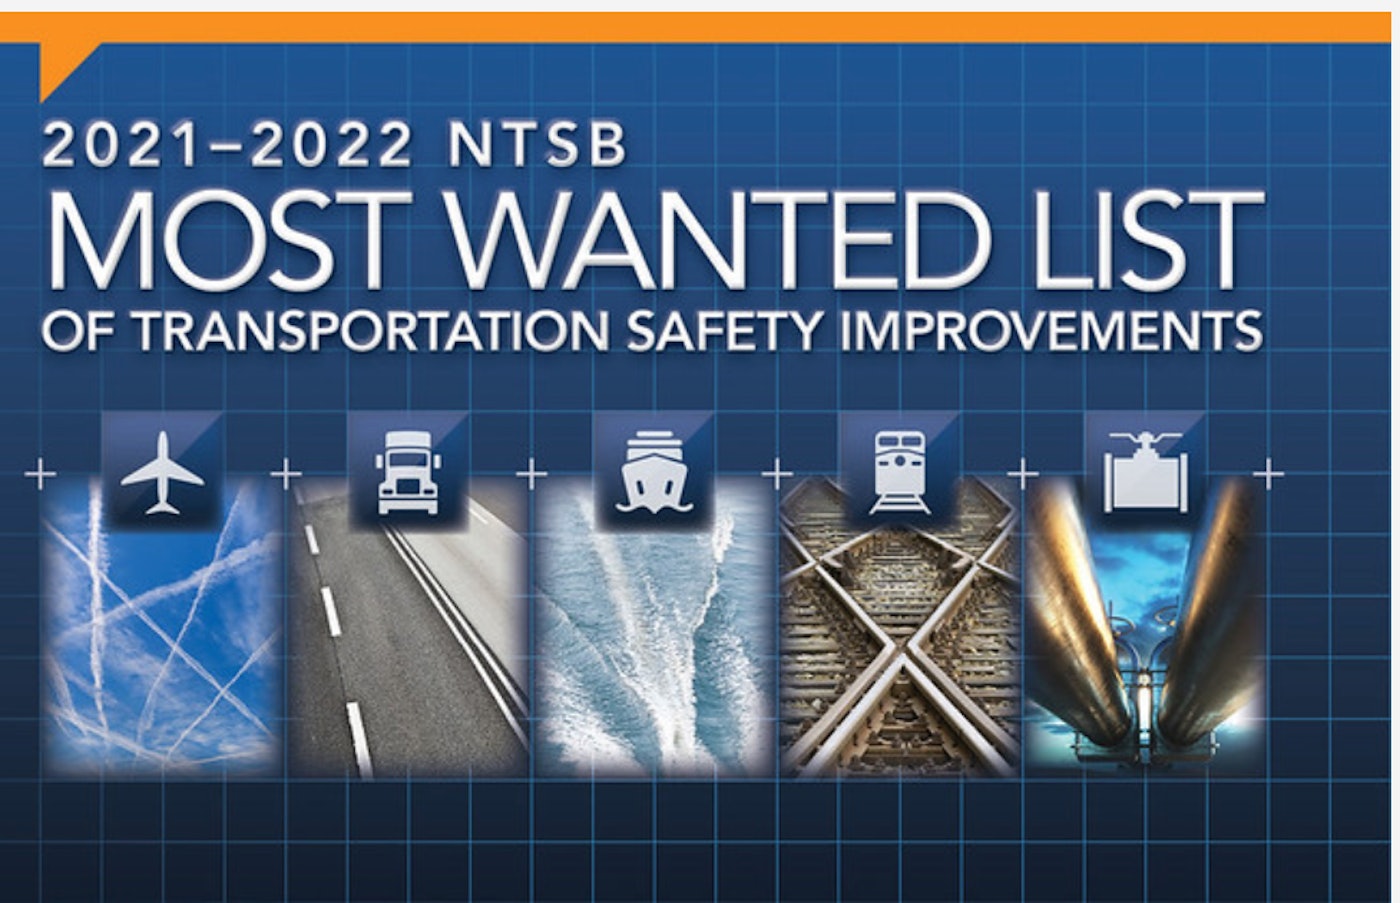 NTSB's Most Wanted list includes speed limiters, collision avoidance